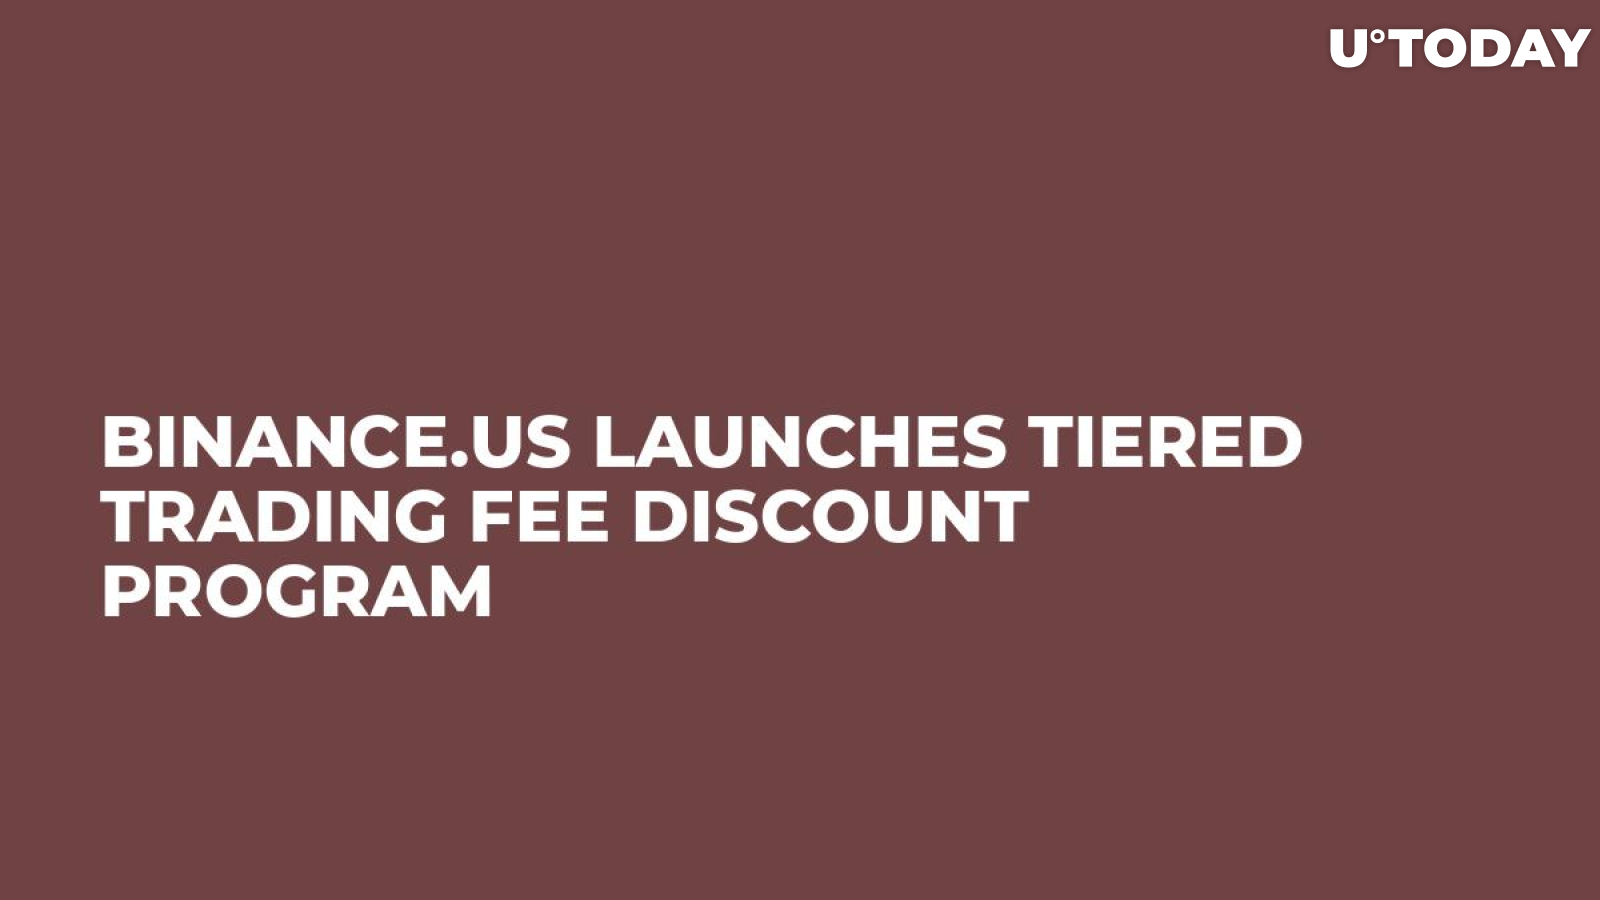 Binance.US Launches Tiered Trading Fee Discount Program